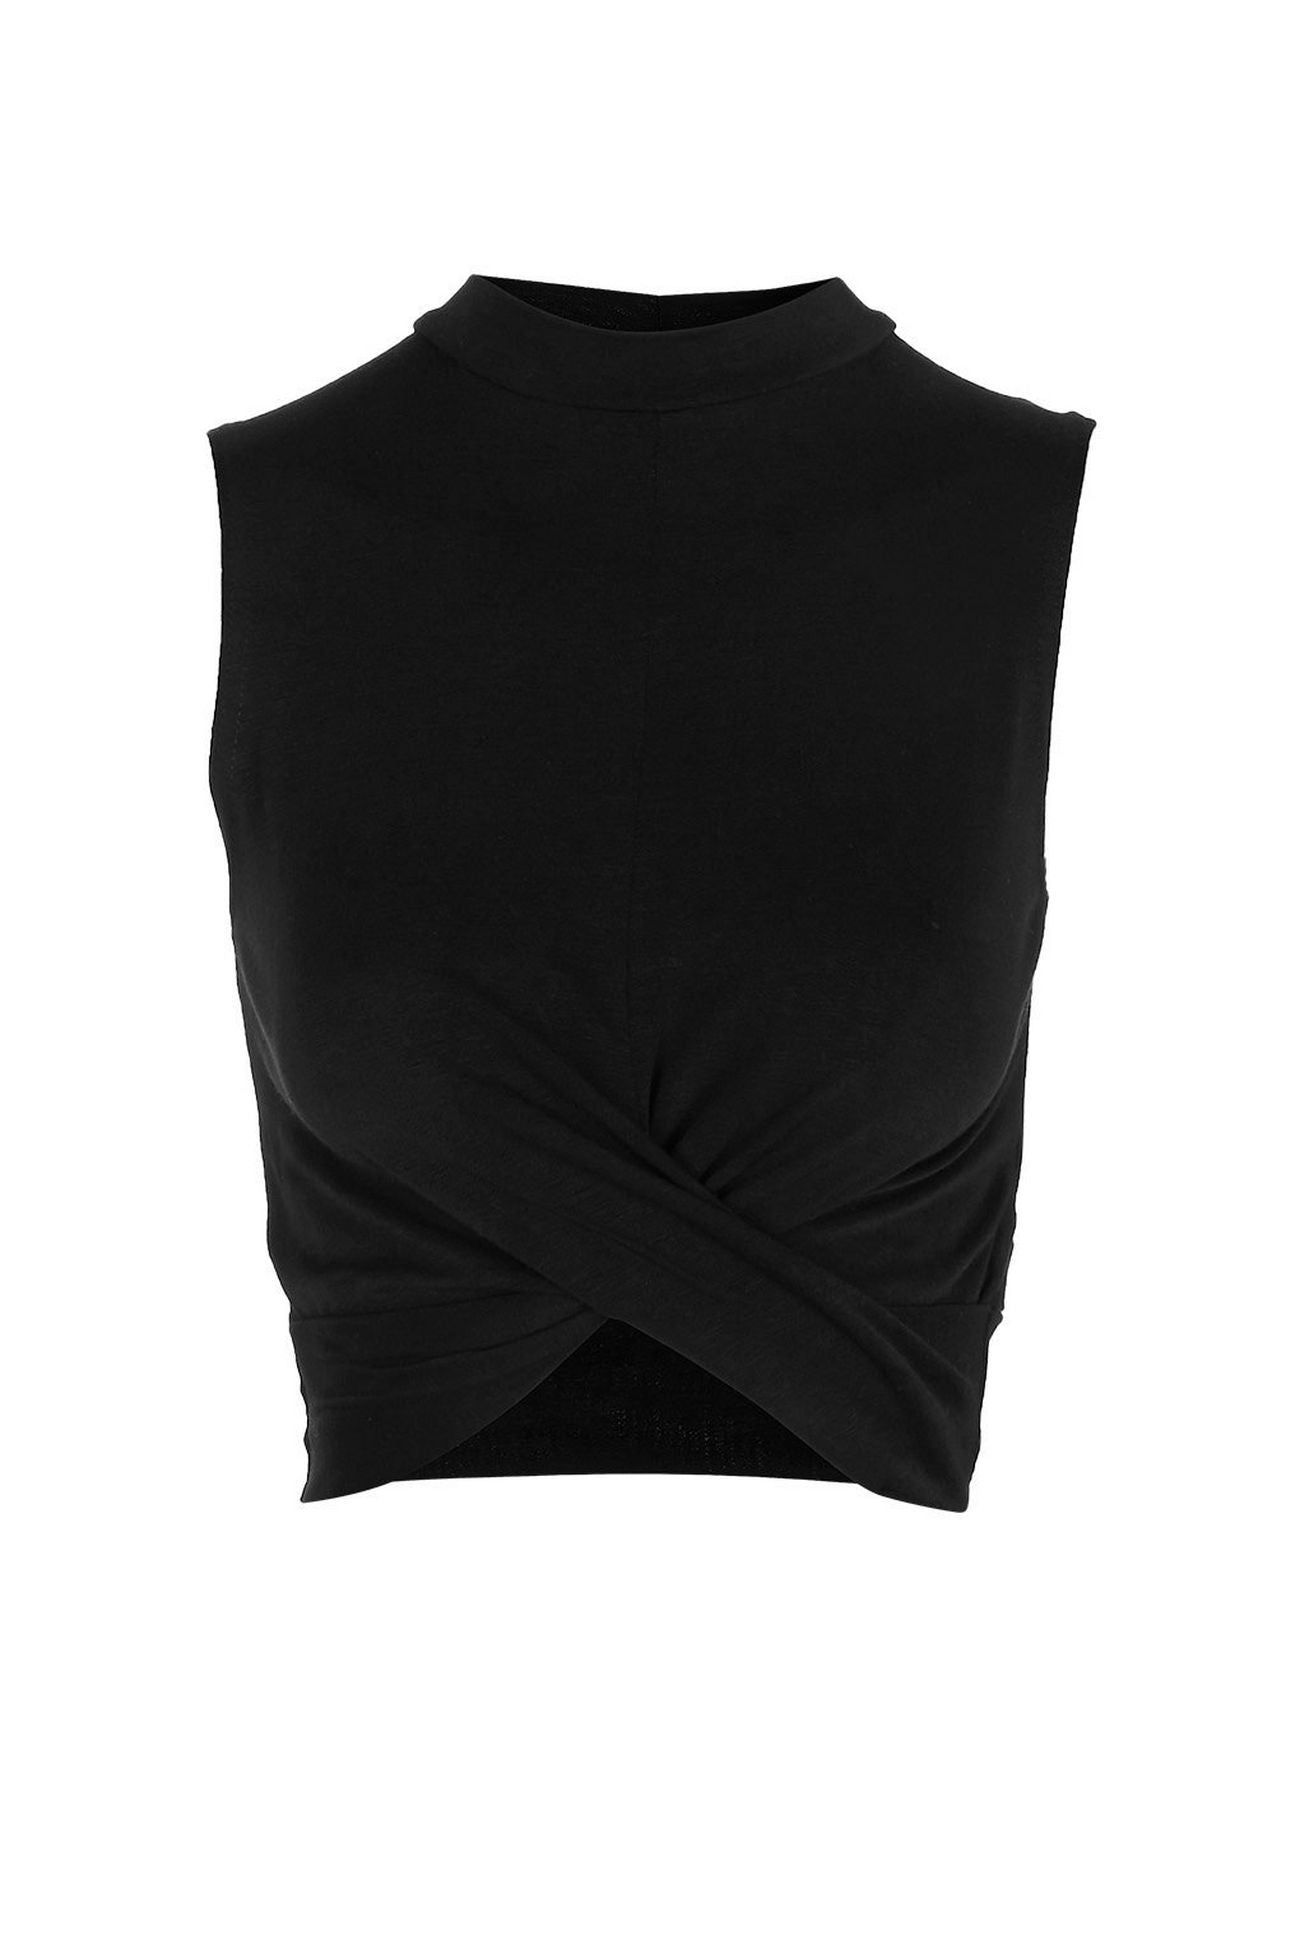 Topshop Petite Womens Black Twist Front Crop Top – Stockpoint Apparel Outlet